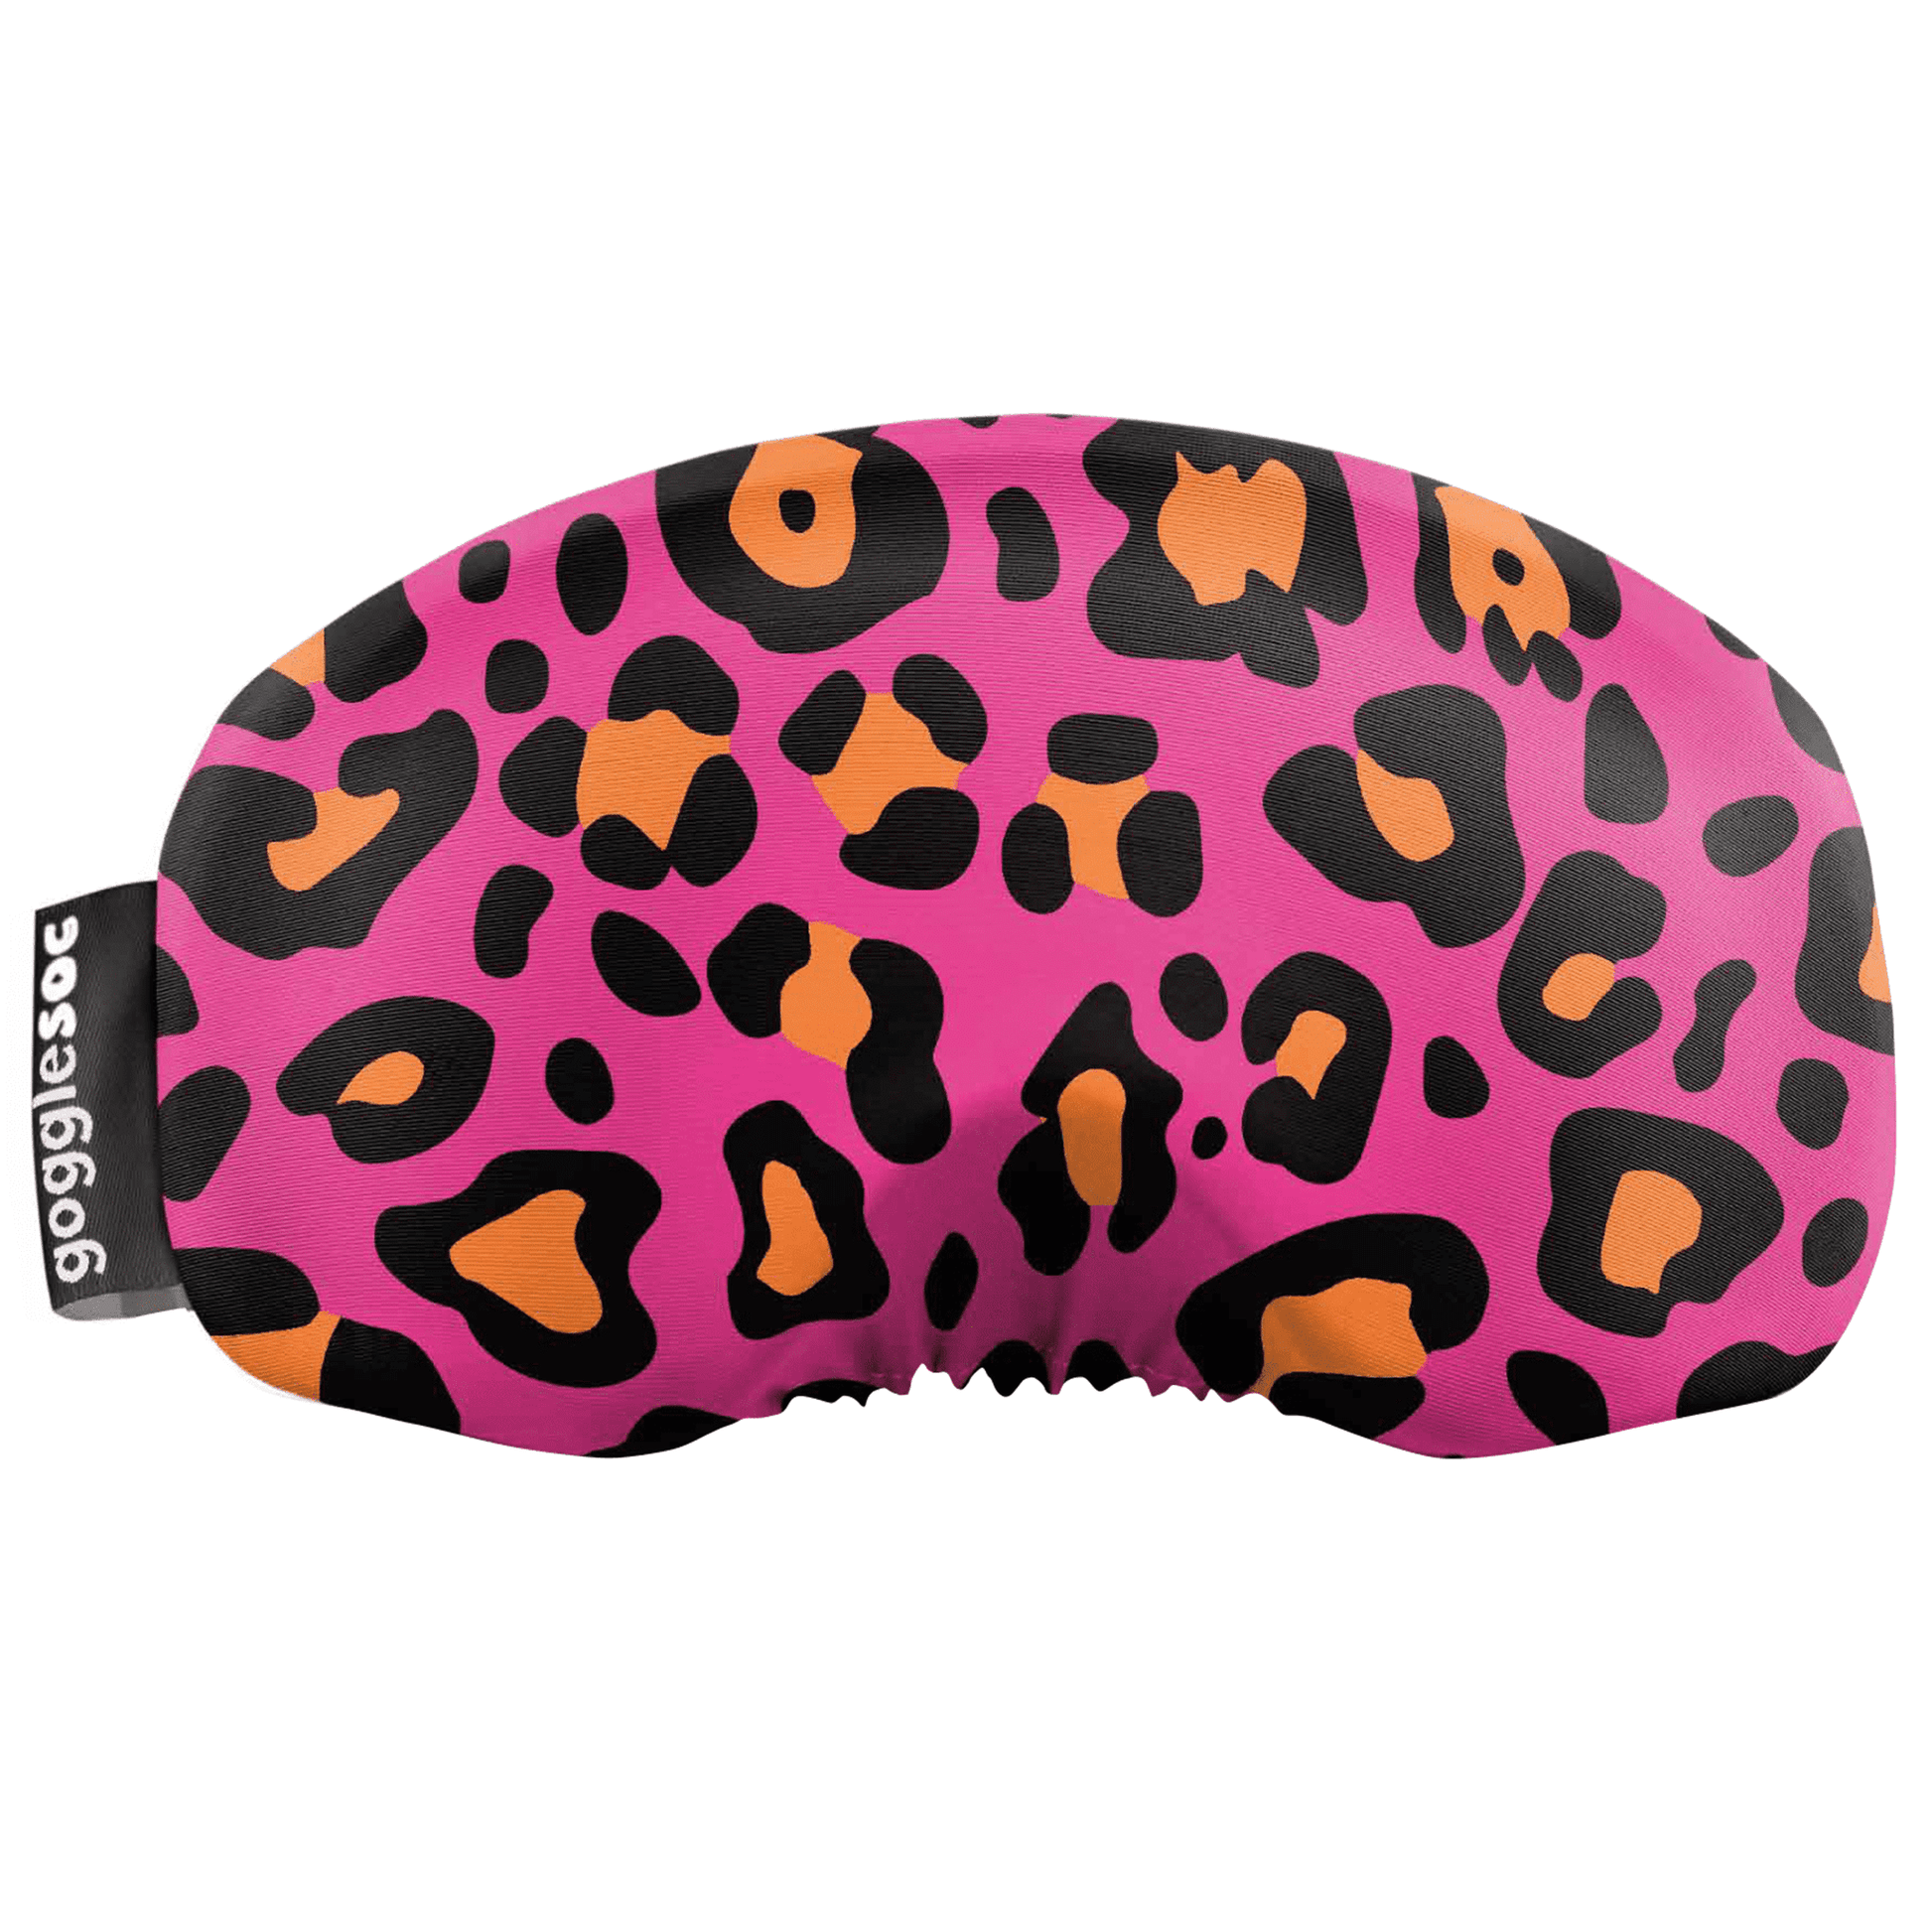 Gogglesoc - Pink Leopard Soc Funky Yeti Exclusive Goggle Cover